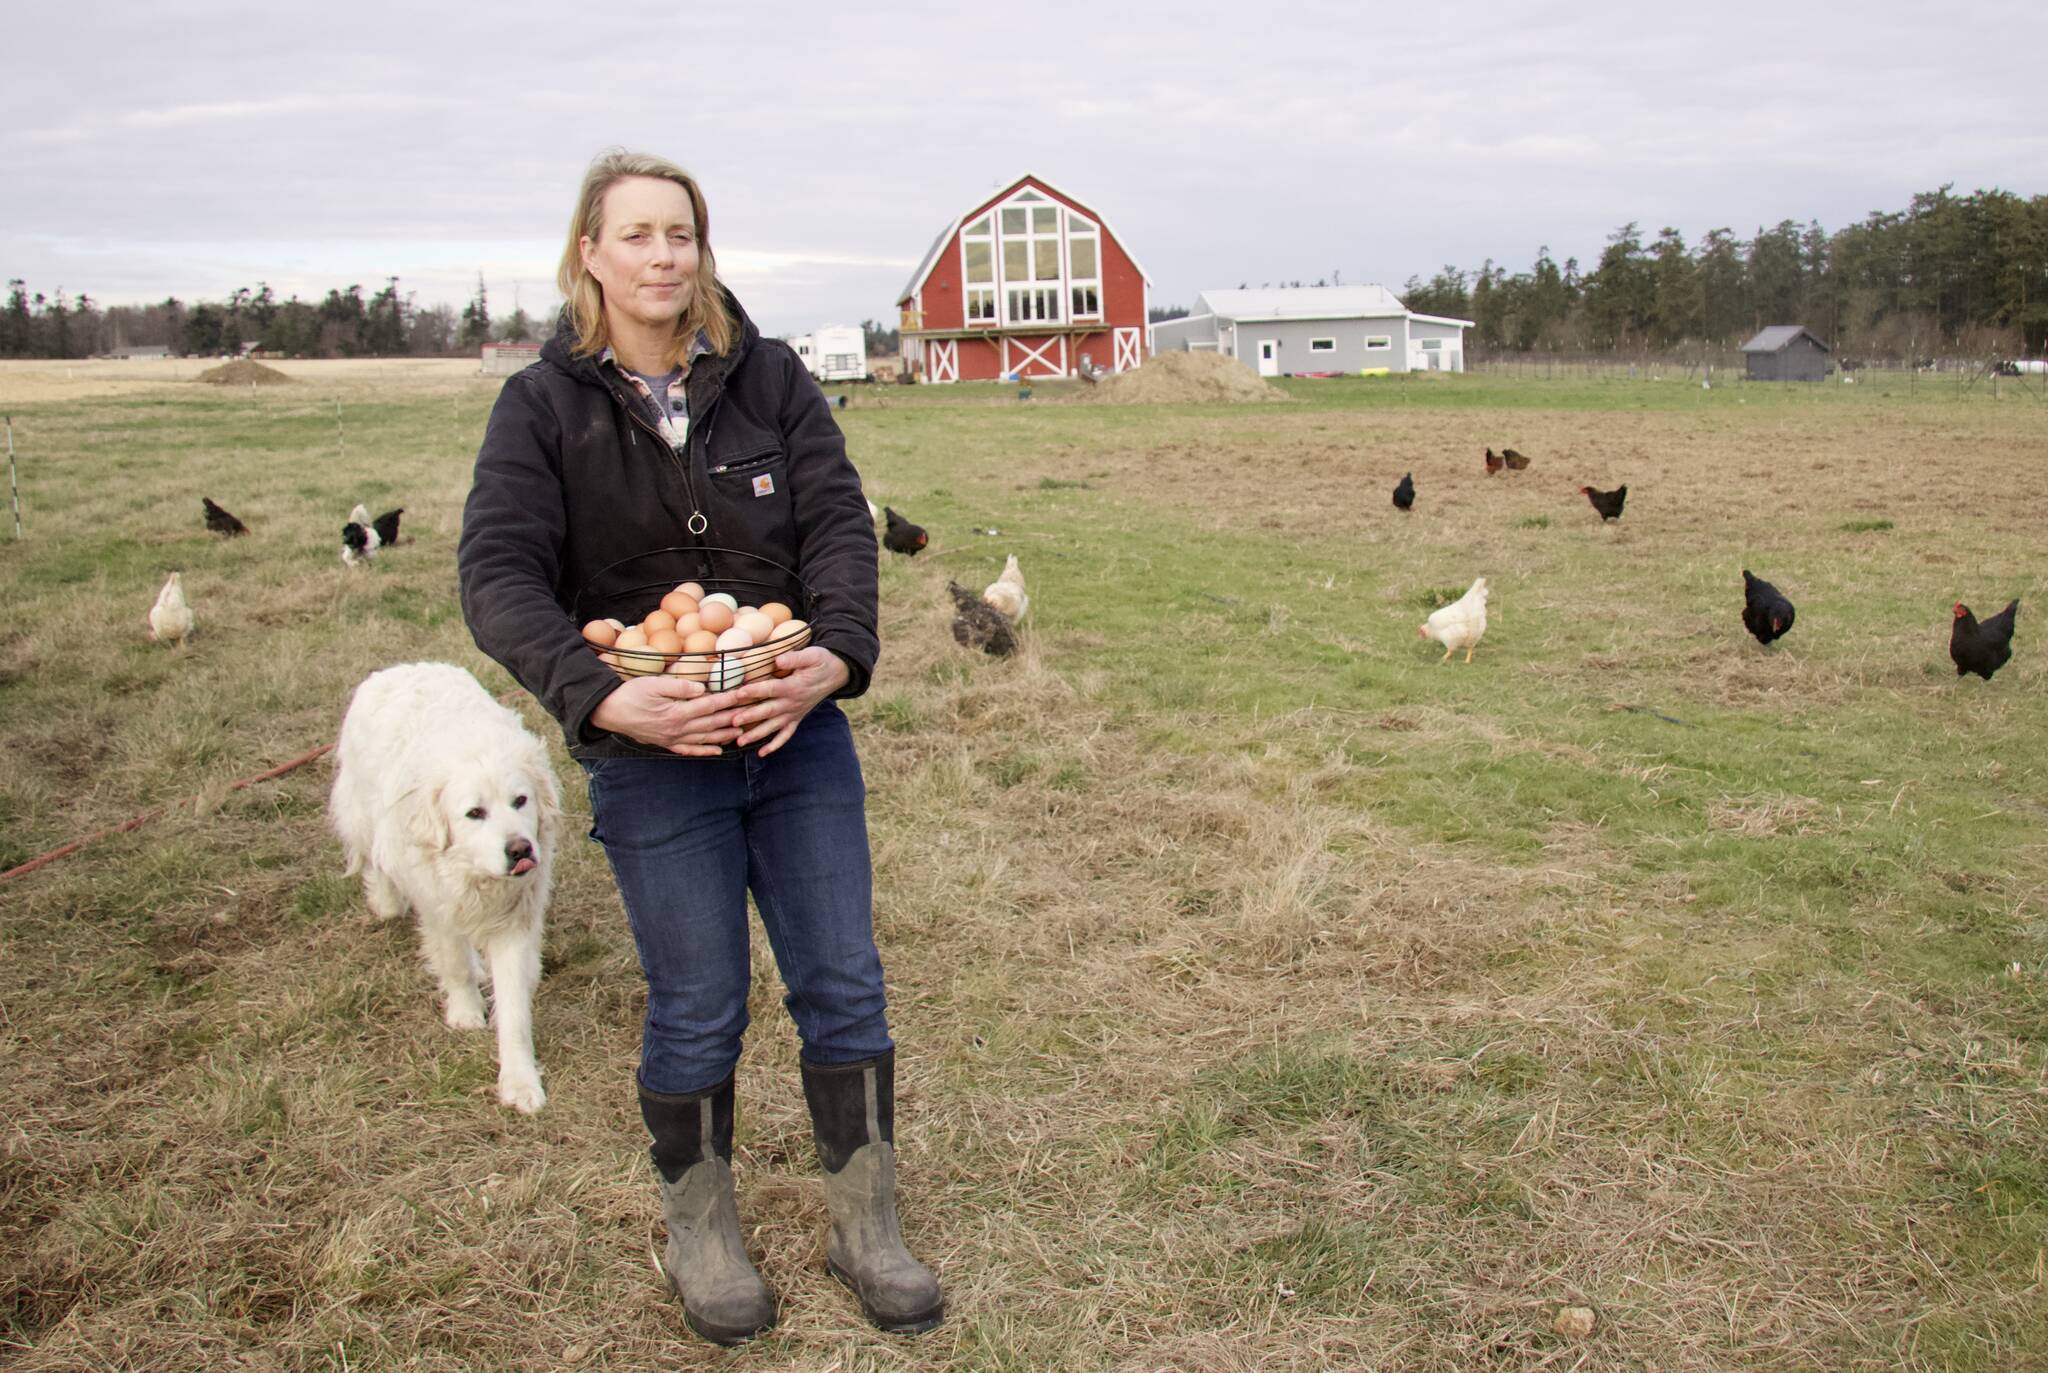 Brooke Crowder owns 1902 Ranch, a Coupeville farm that has had to raise its egg prices due to the shortage and high demand. (Photo by Rachel Rosen/Whidbey News-Times)